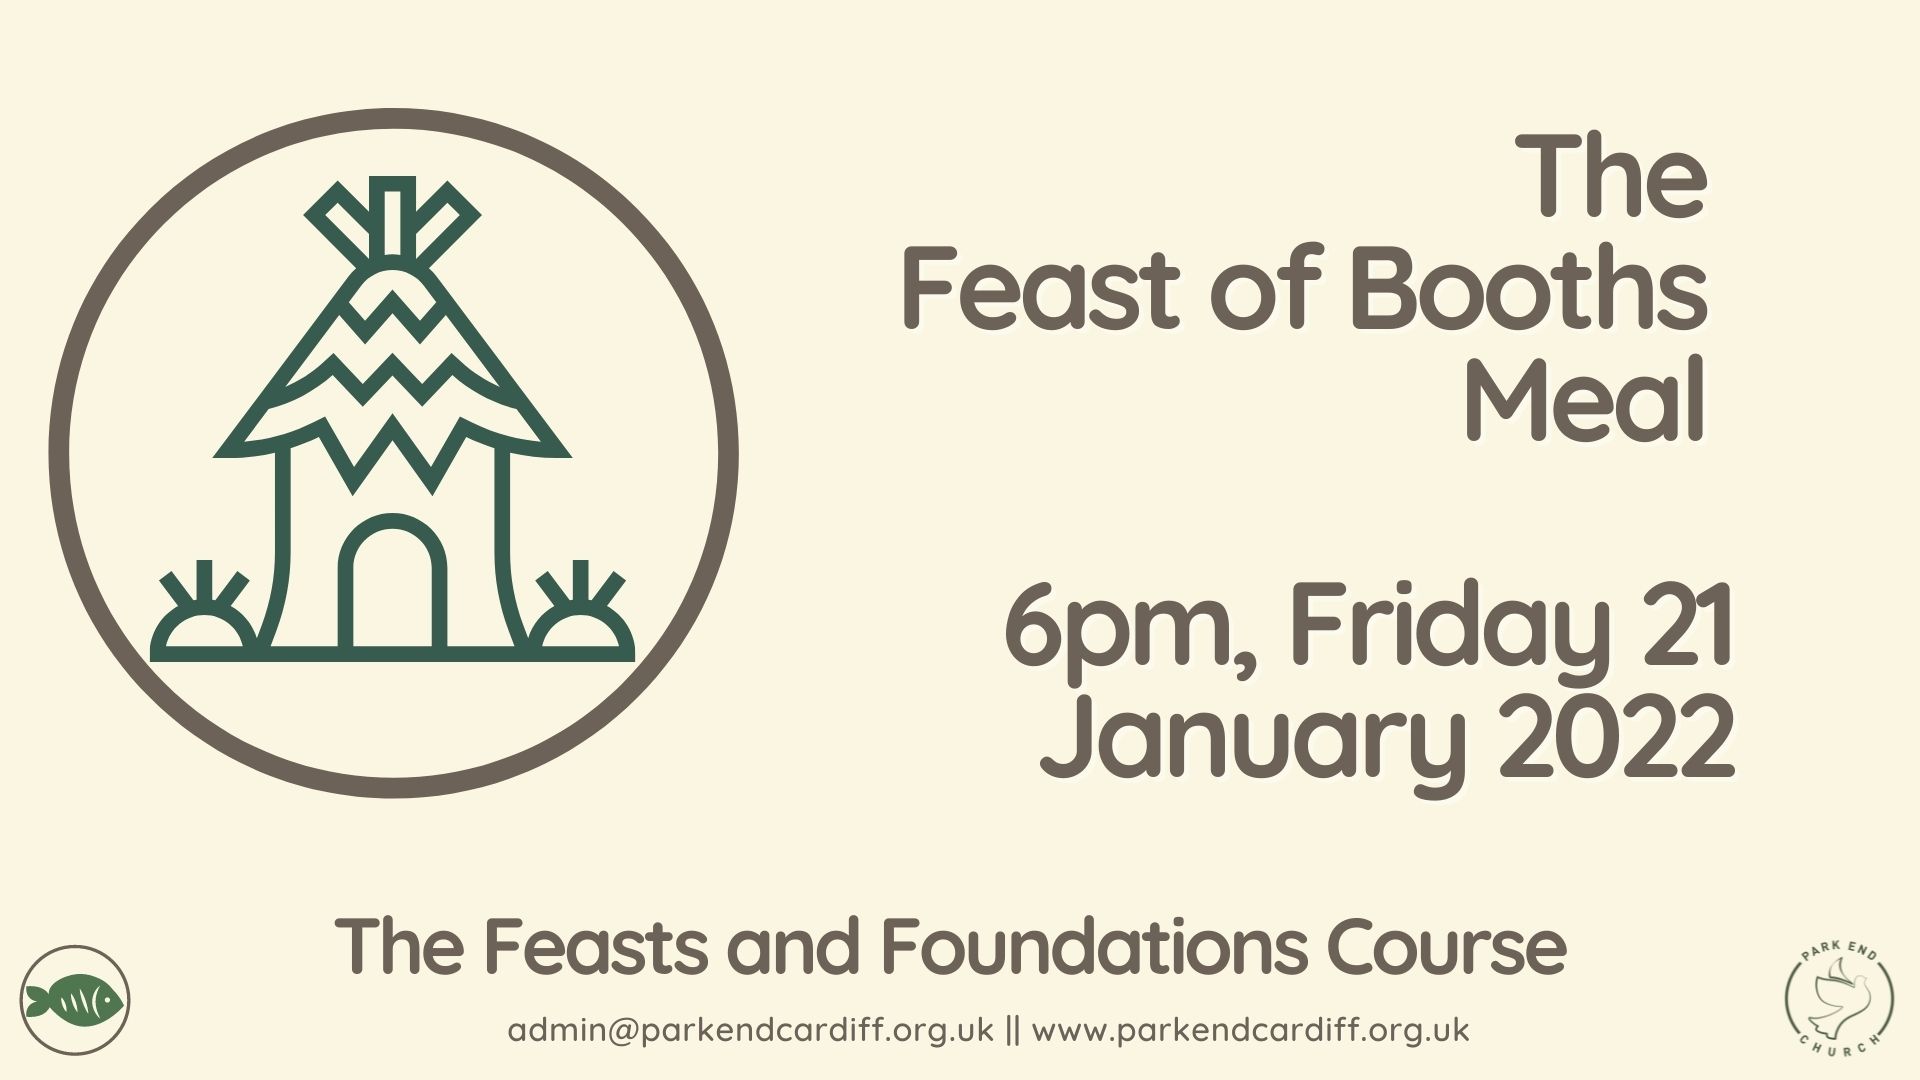 Copy of Feast of Booths Meal